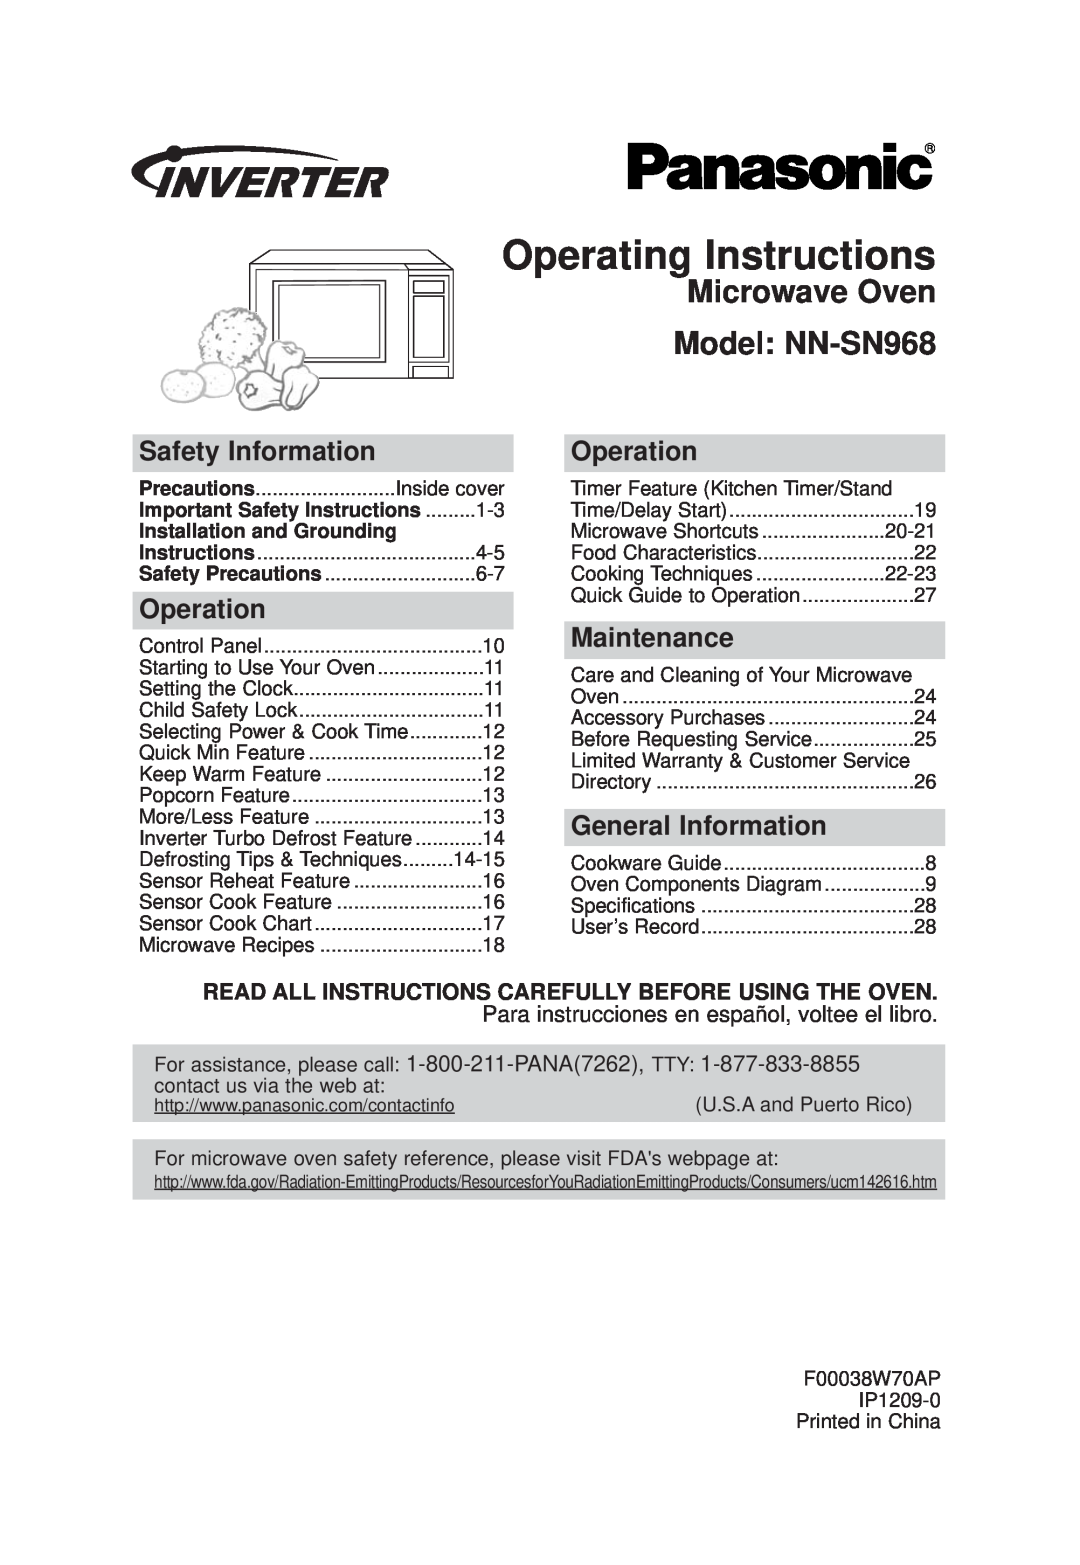 Panasonic operating instructions Operating Instructions, Microwave Oven Model NN-SN968, Safety Information, Operation 